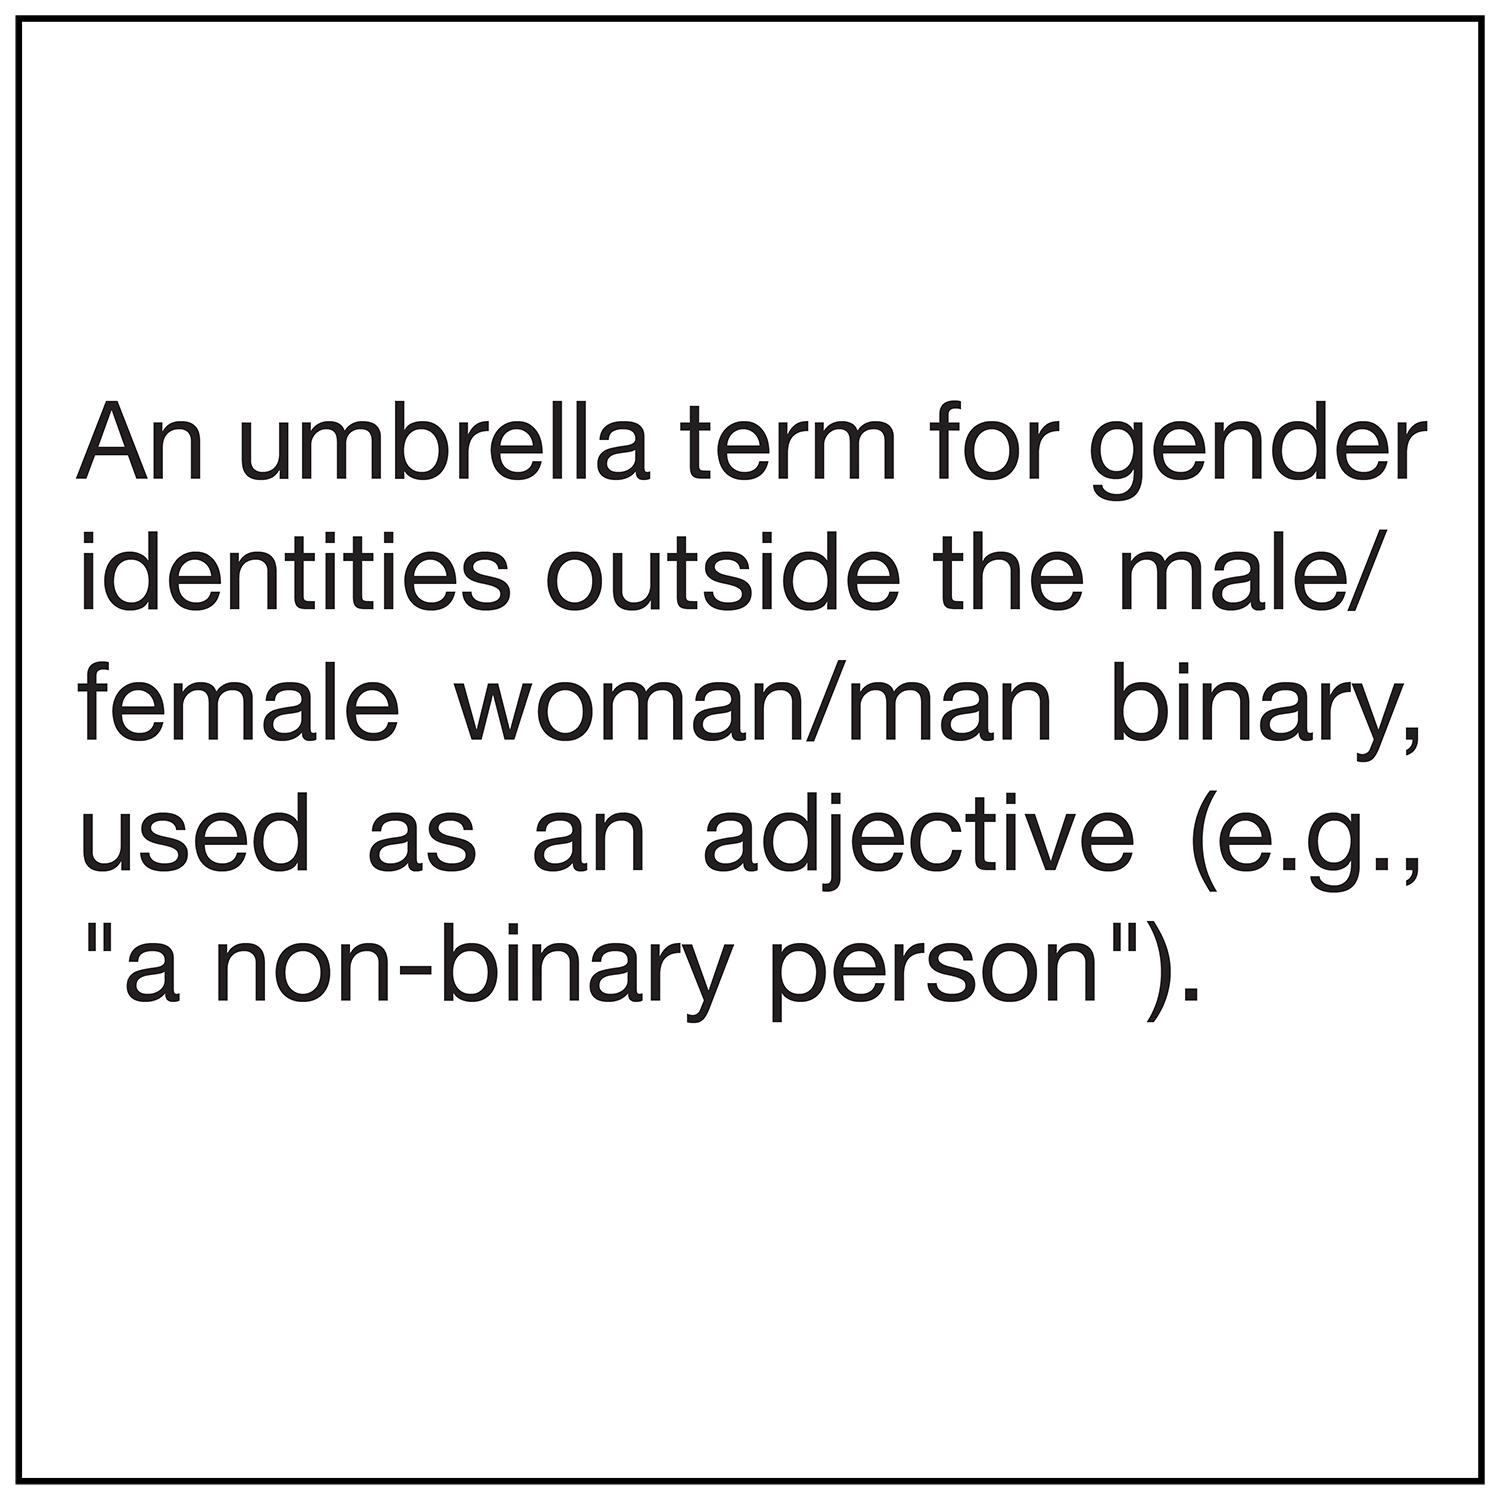  An umbrella term for gender identities outside the male/female woman/man binary, used as an adjective (e.g., "a non-binary person"). 